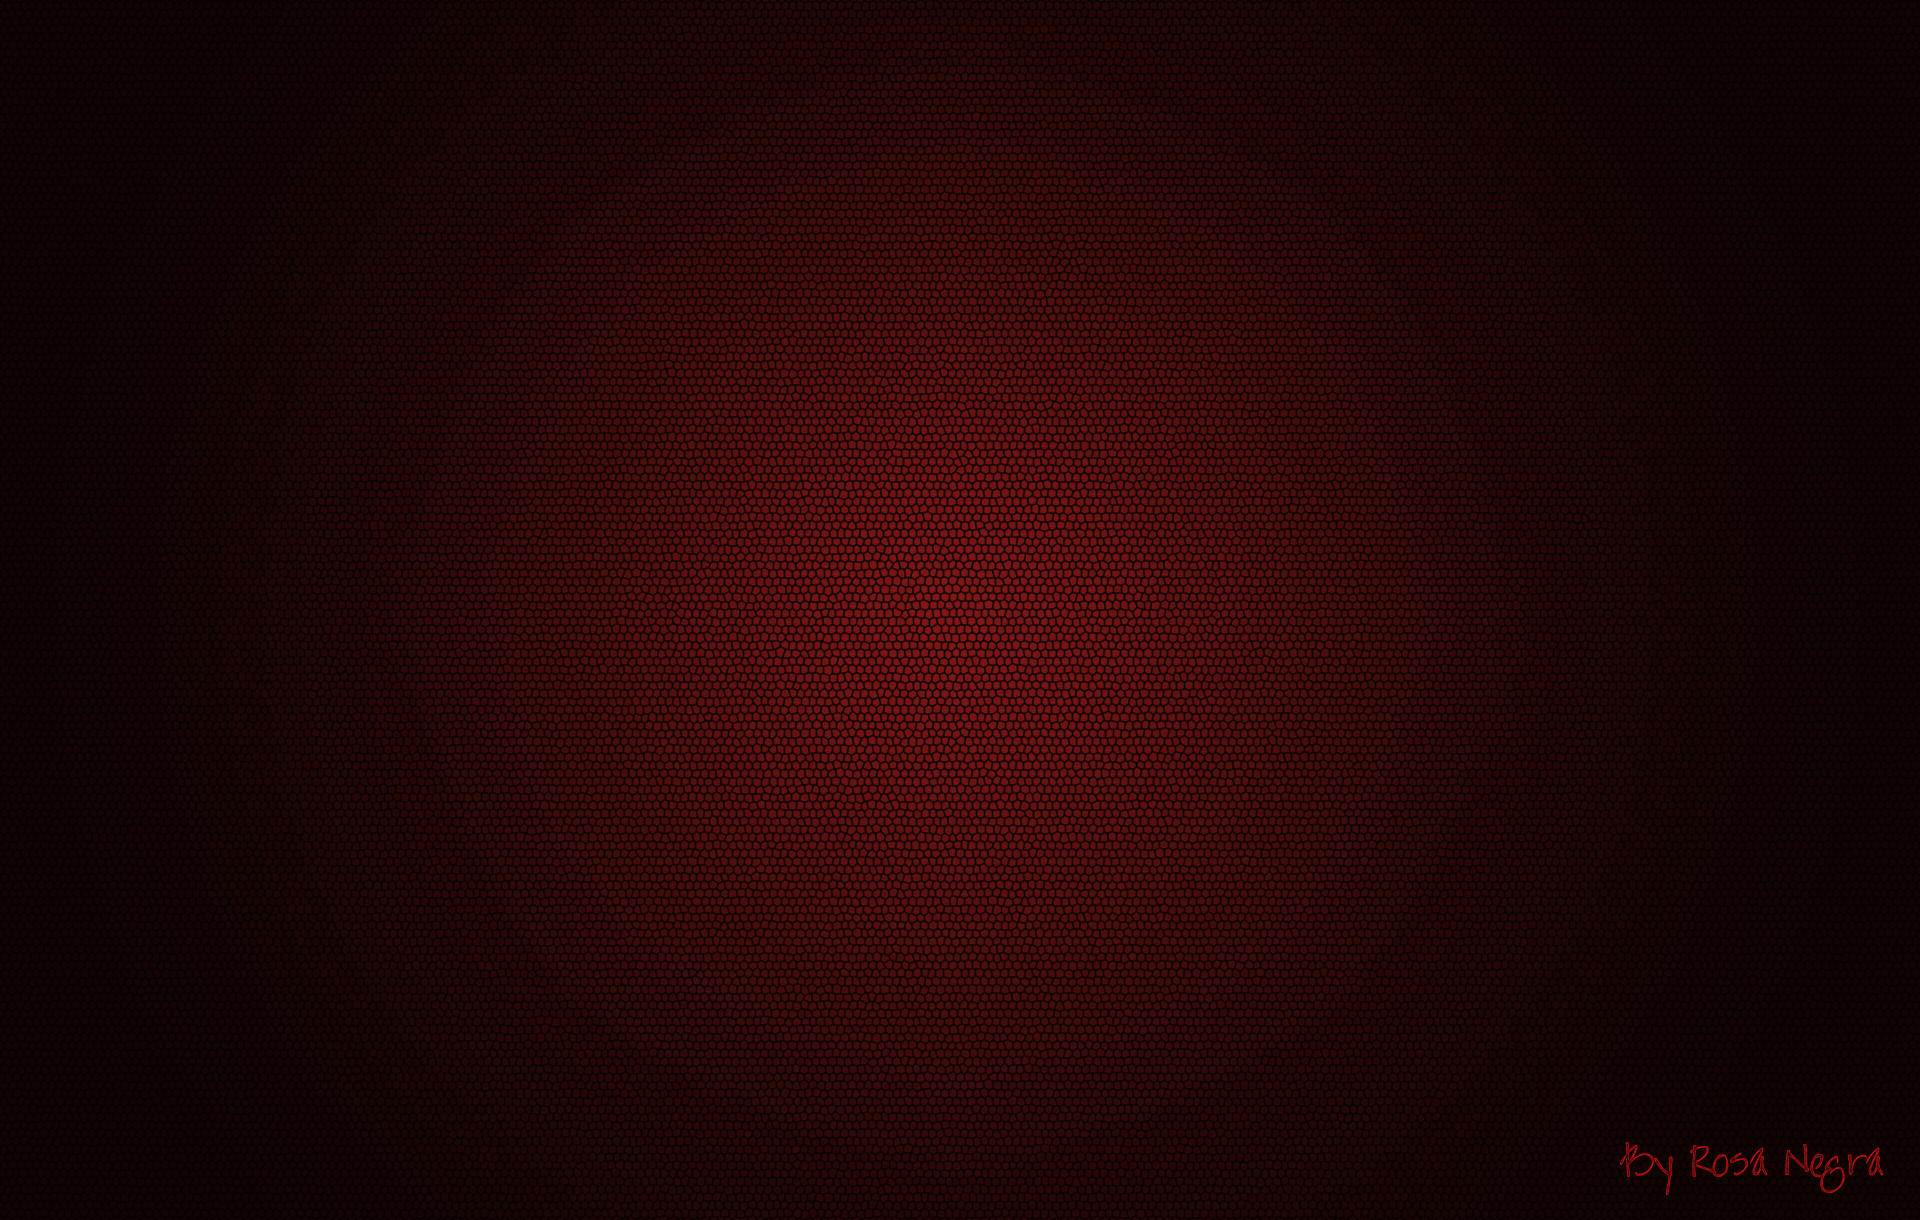 General 1920x1220 artwork simple background texture red background